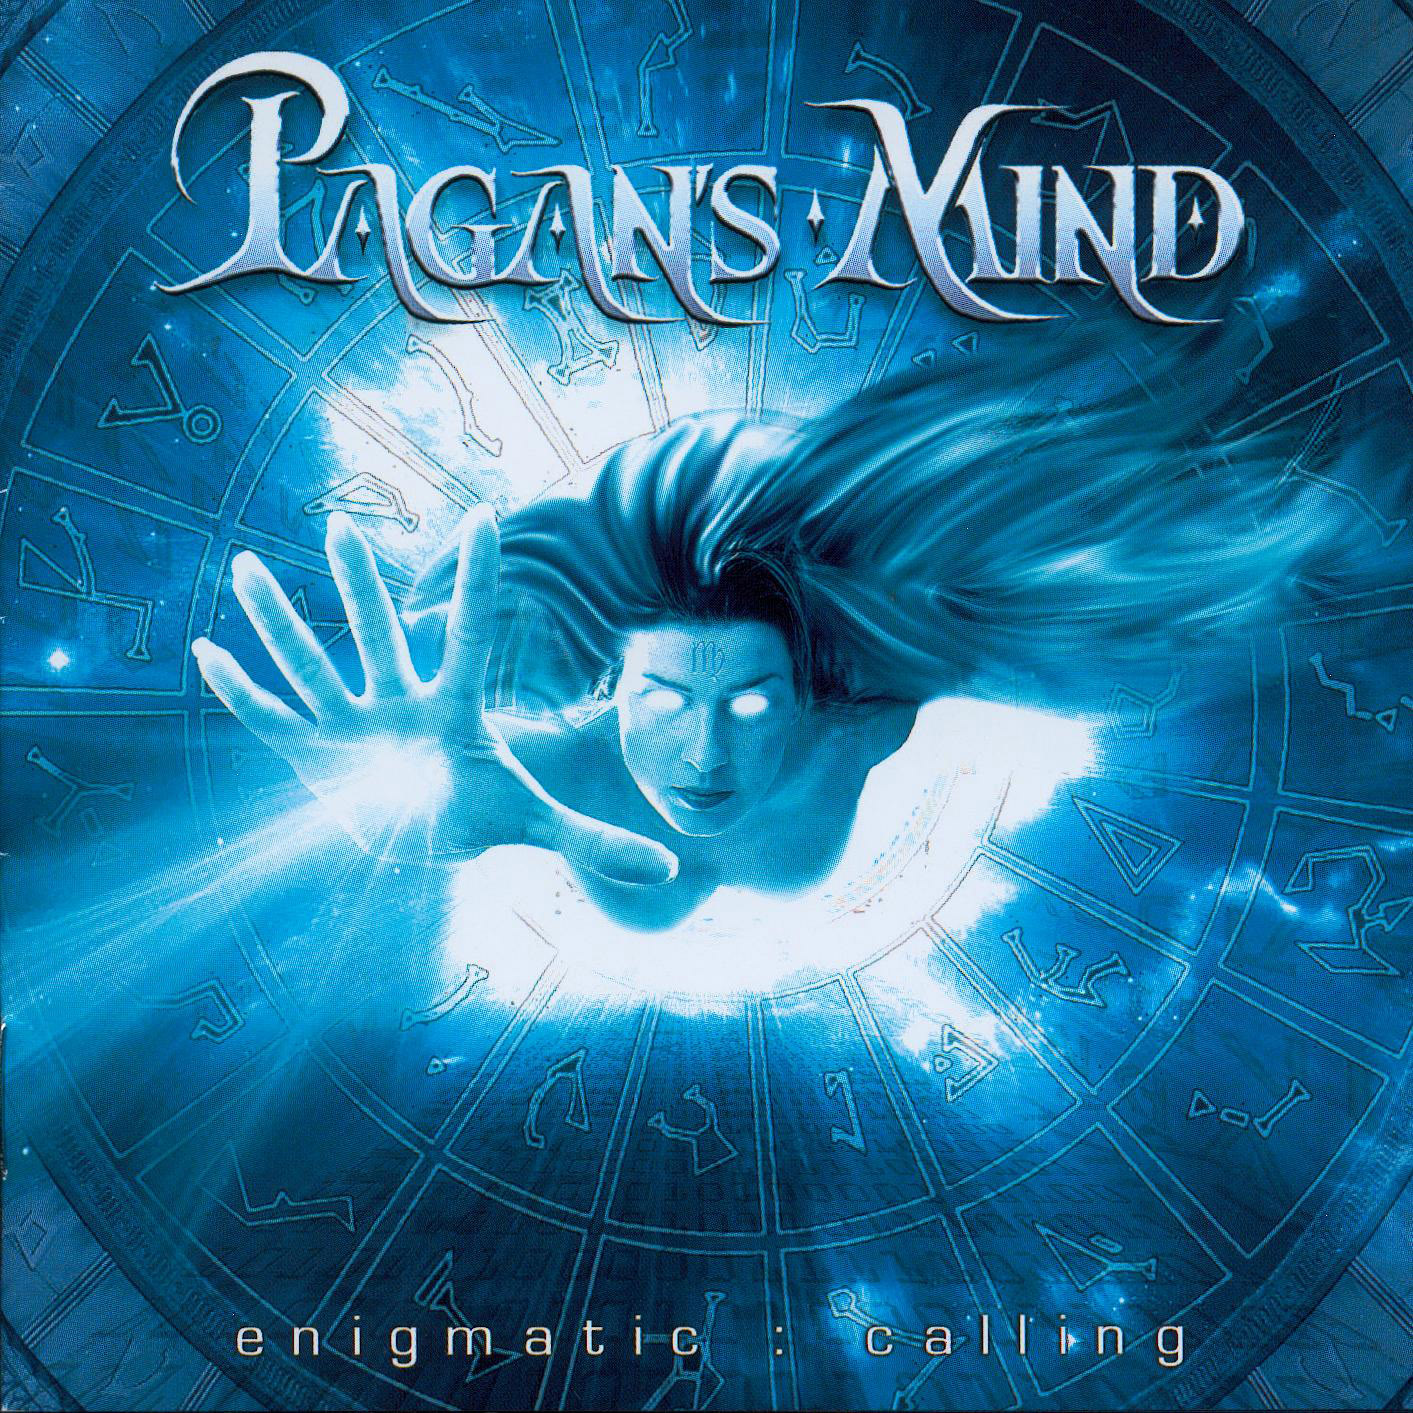 Pagans_Mind-Enigmatic_Calling-front square